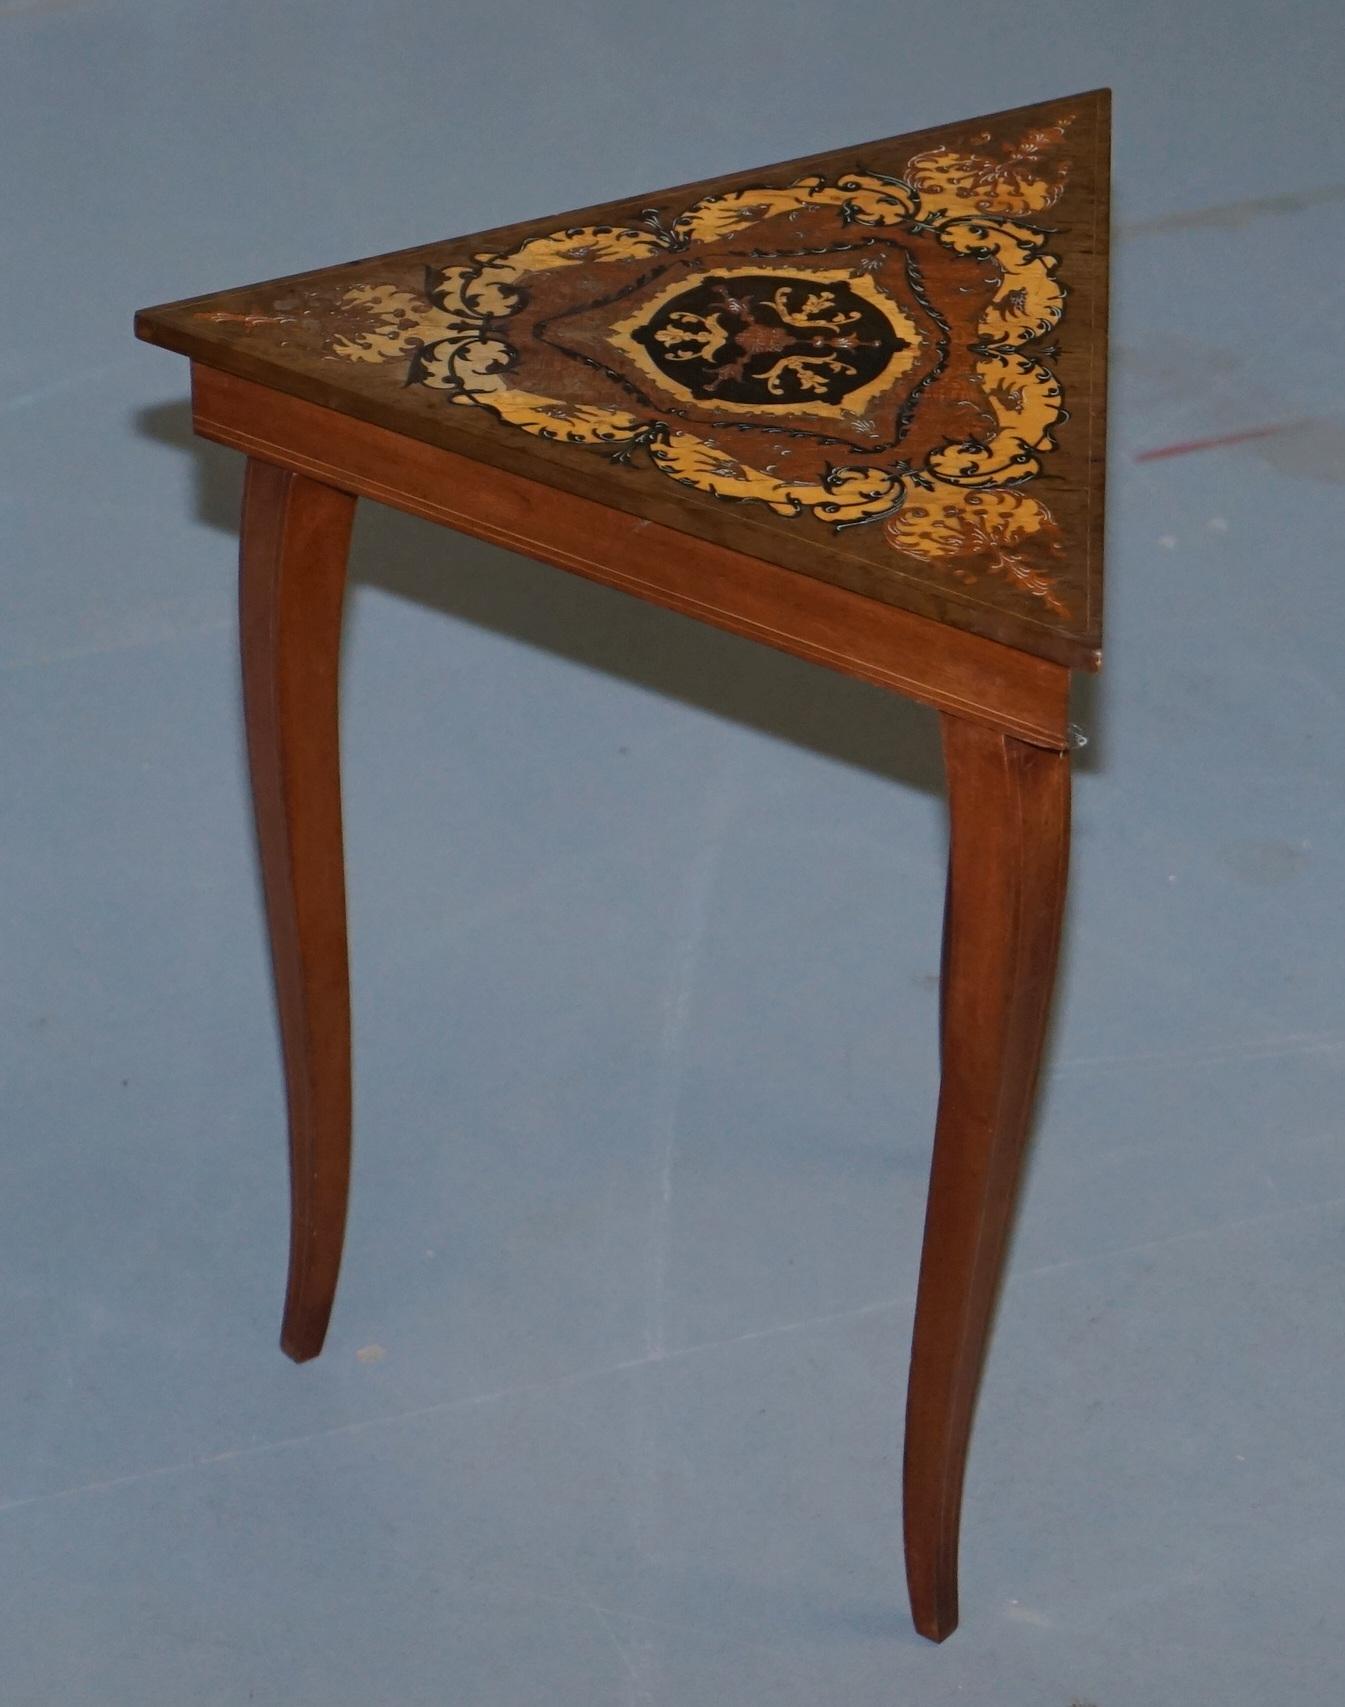 We are delighted to offer for sale this lovely marquetry inlaid small musical side table

A nice decorative side table that plays a lovely little tune

The table has been cleaned waxed and polished and is in good order throughout, the top has